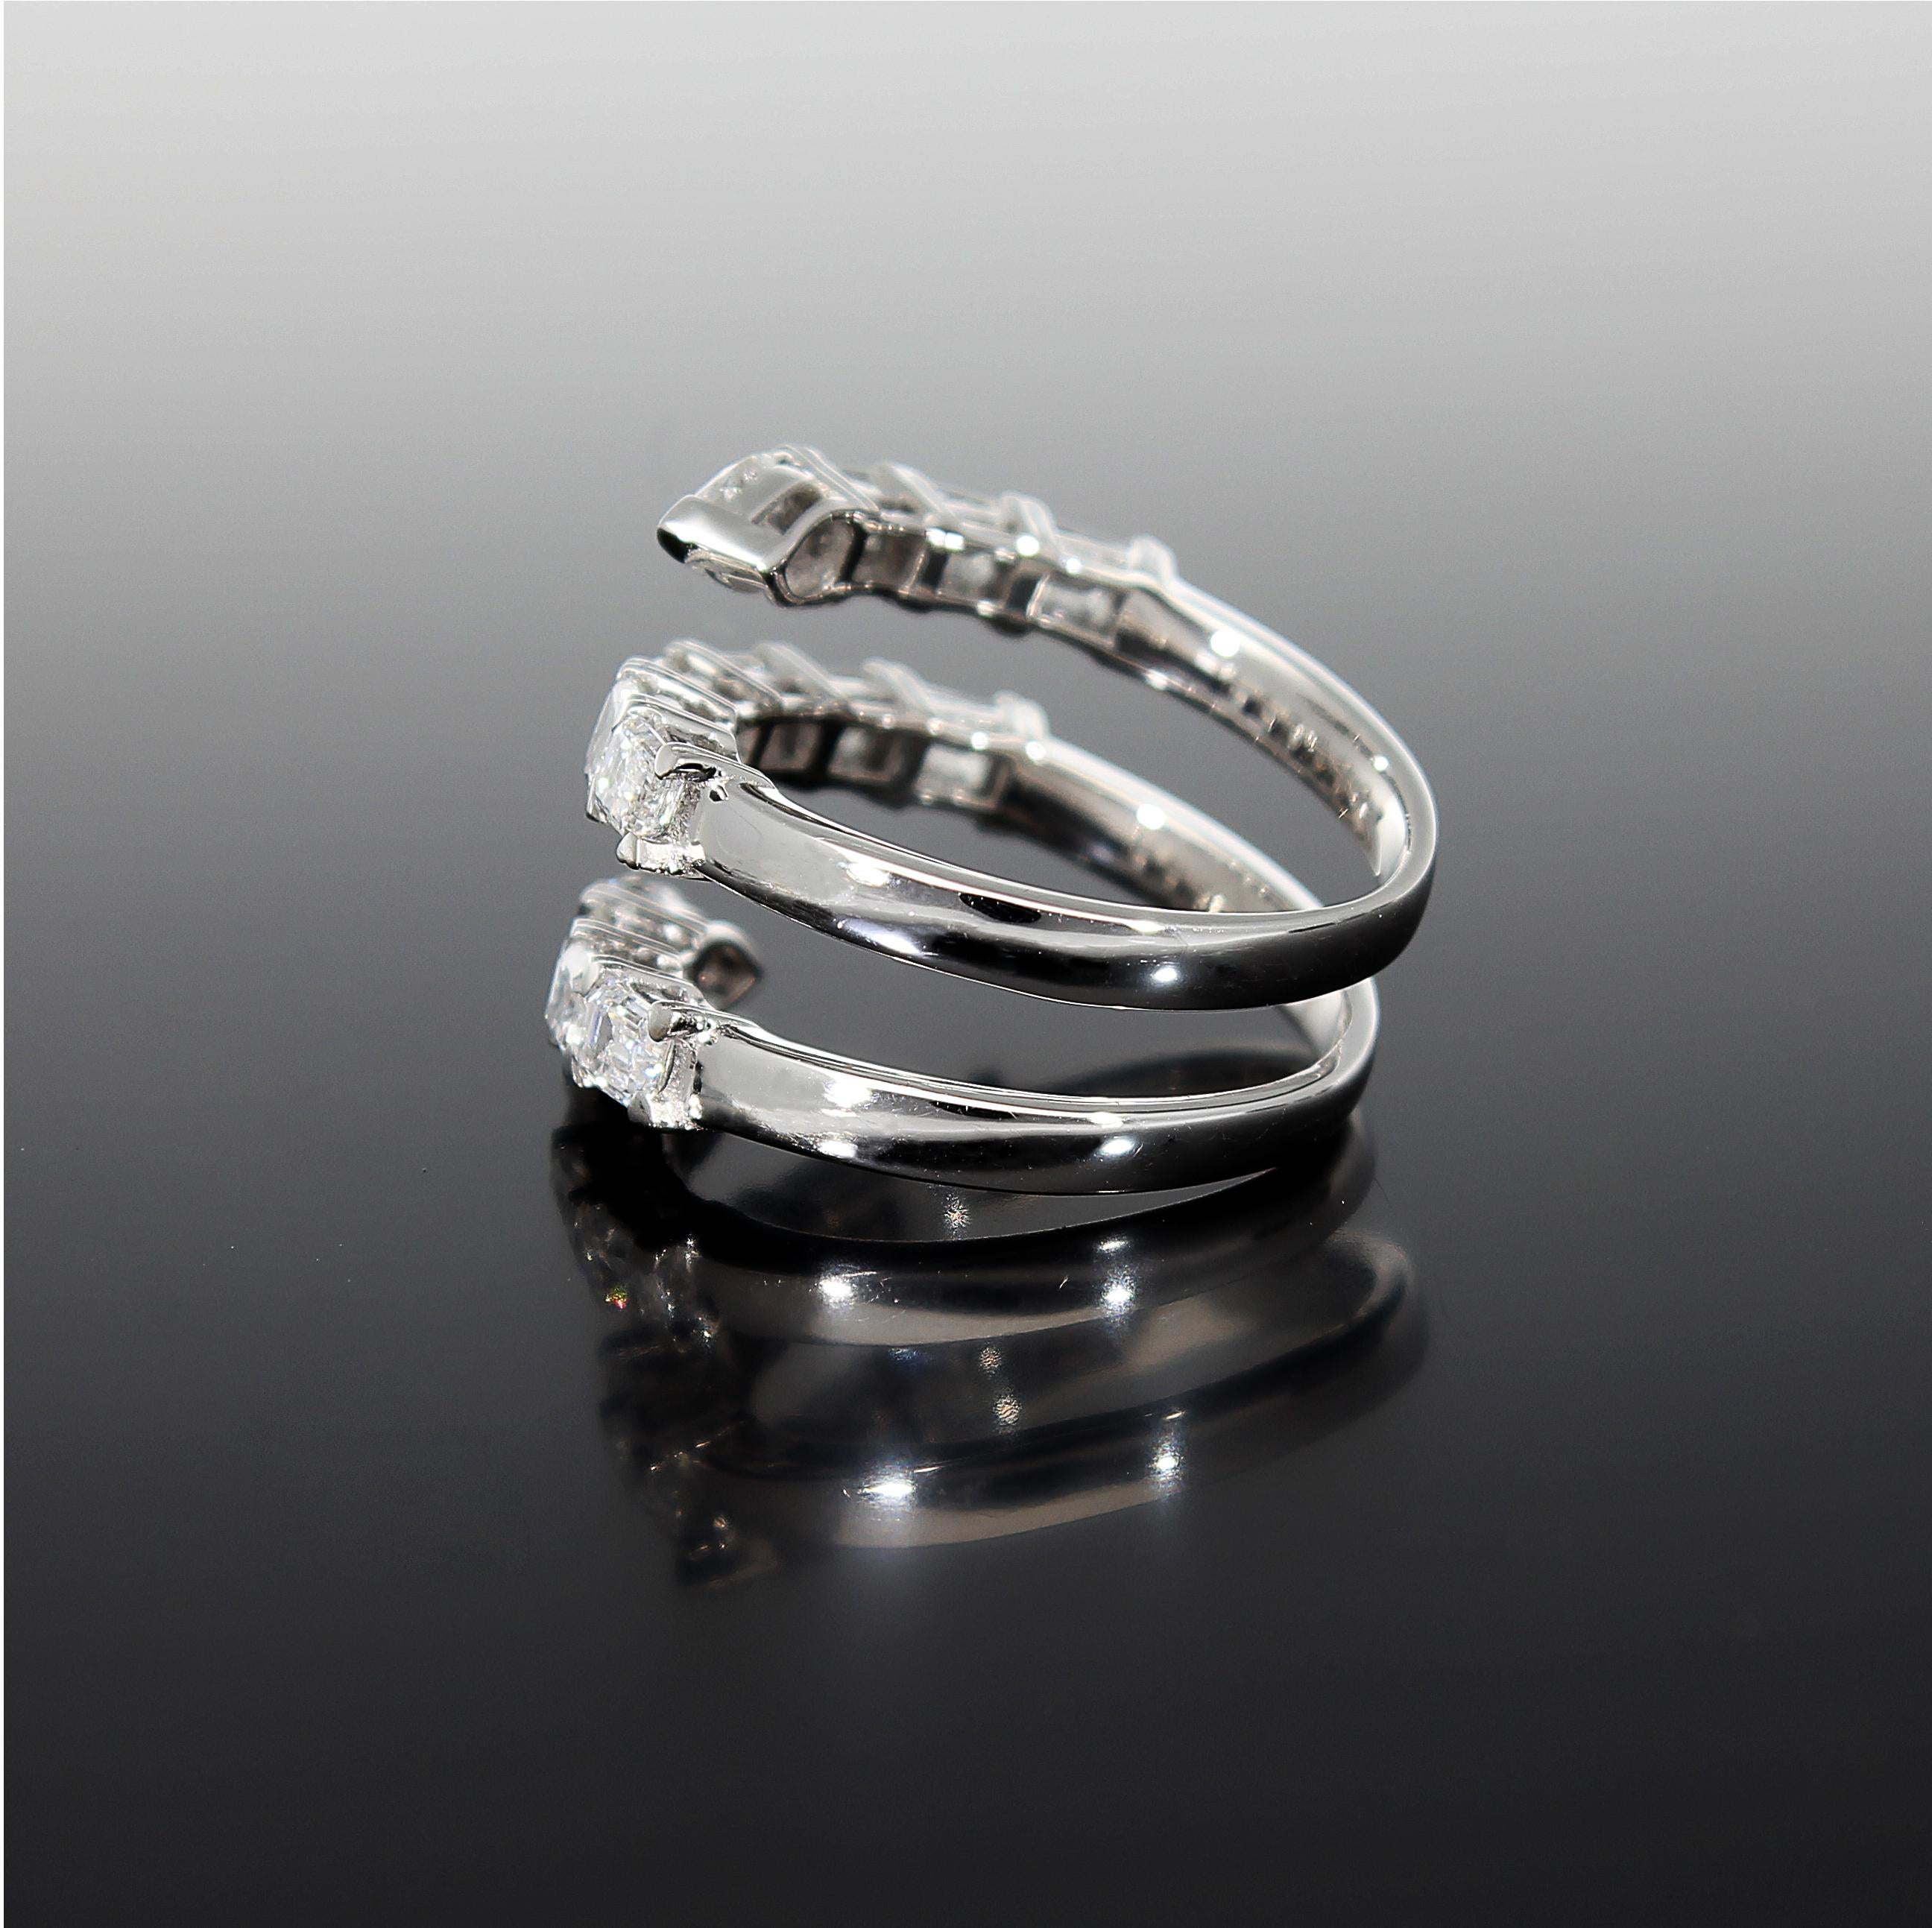 Snake Ring, Emerald Cut and Drop Cut Diamonds, 18 Kt White Gold 8